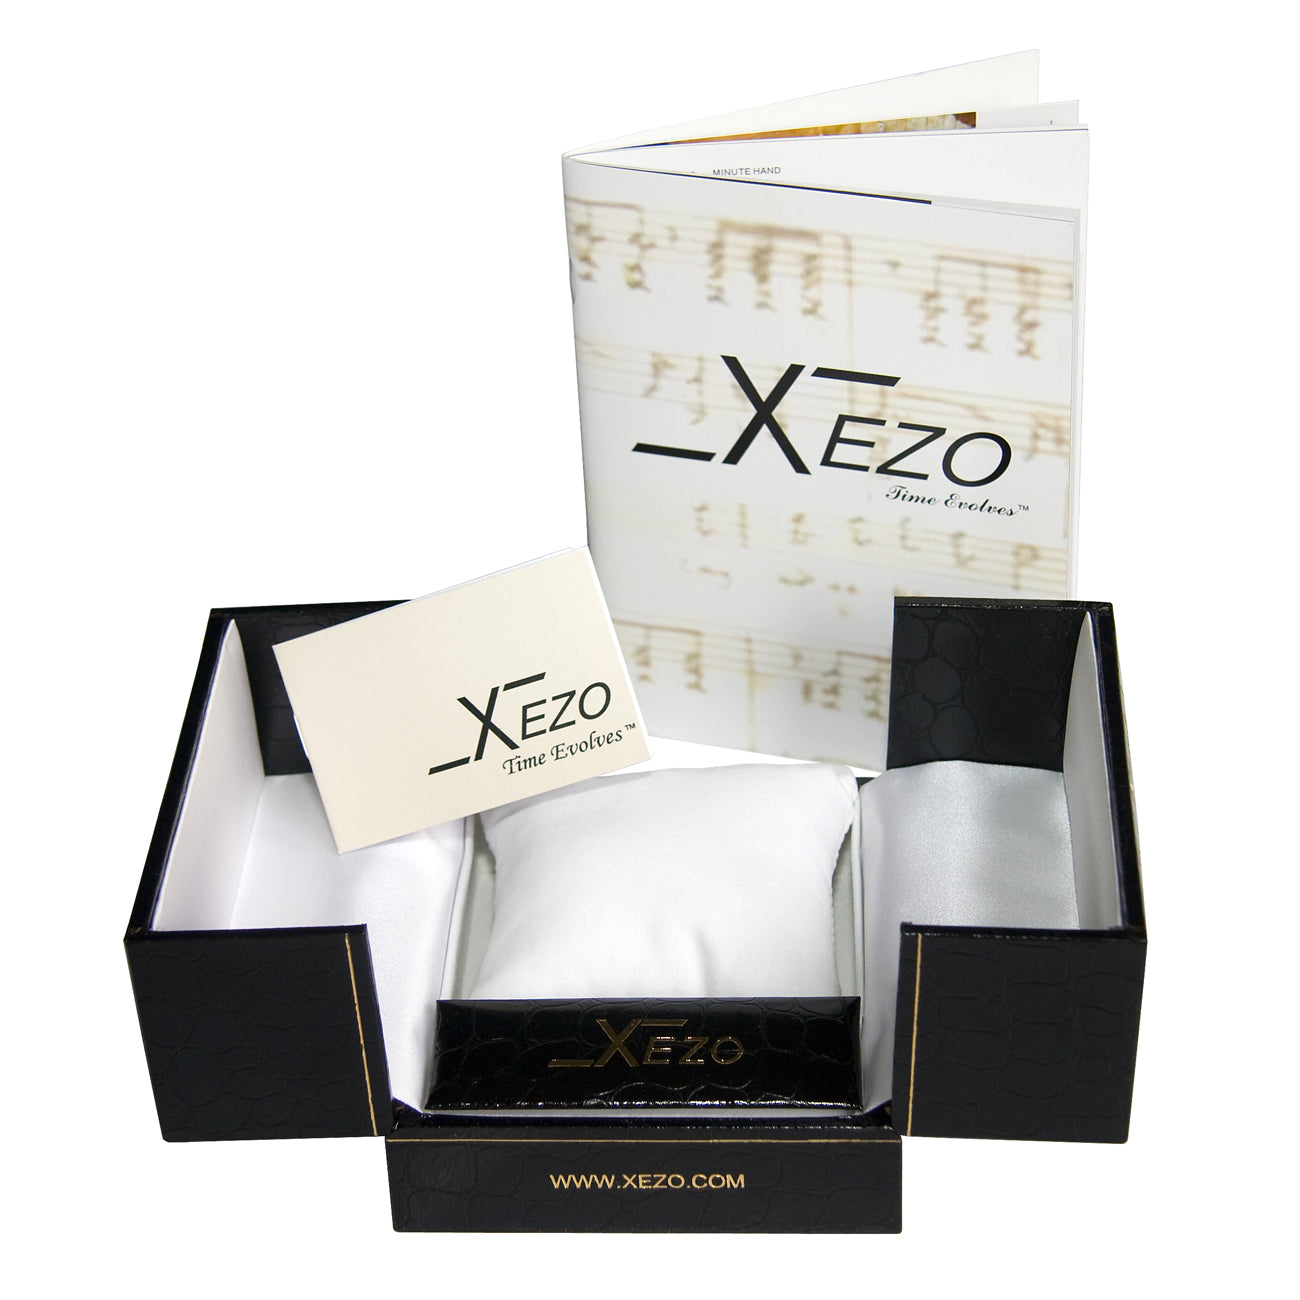 Xezo - Black gift box, certificate and manual of the Air Commando D44-L watch.